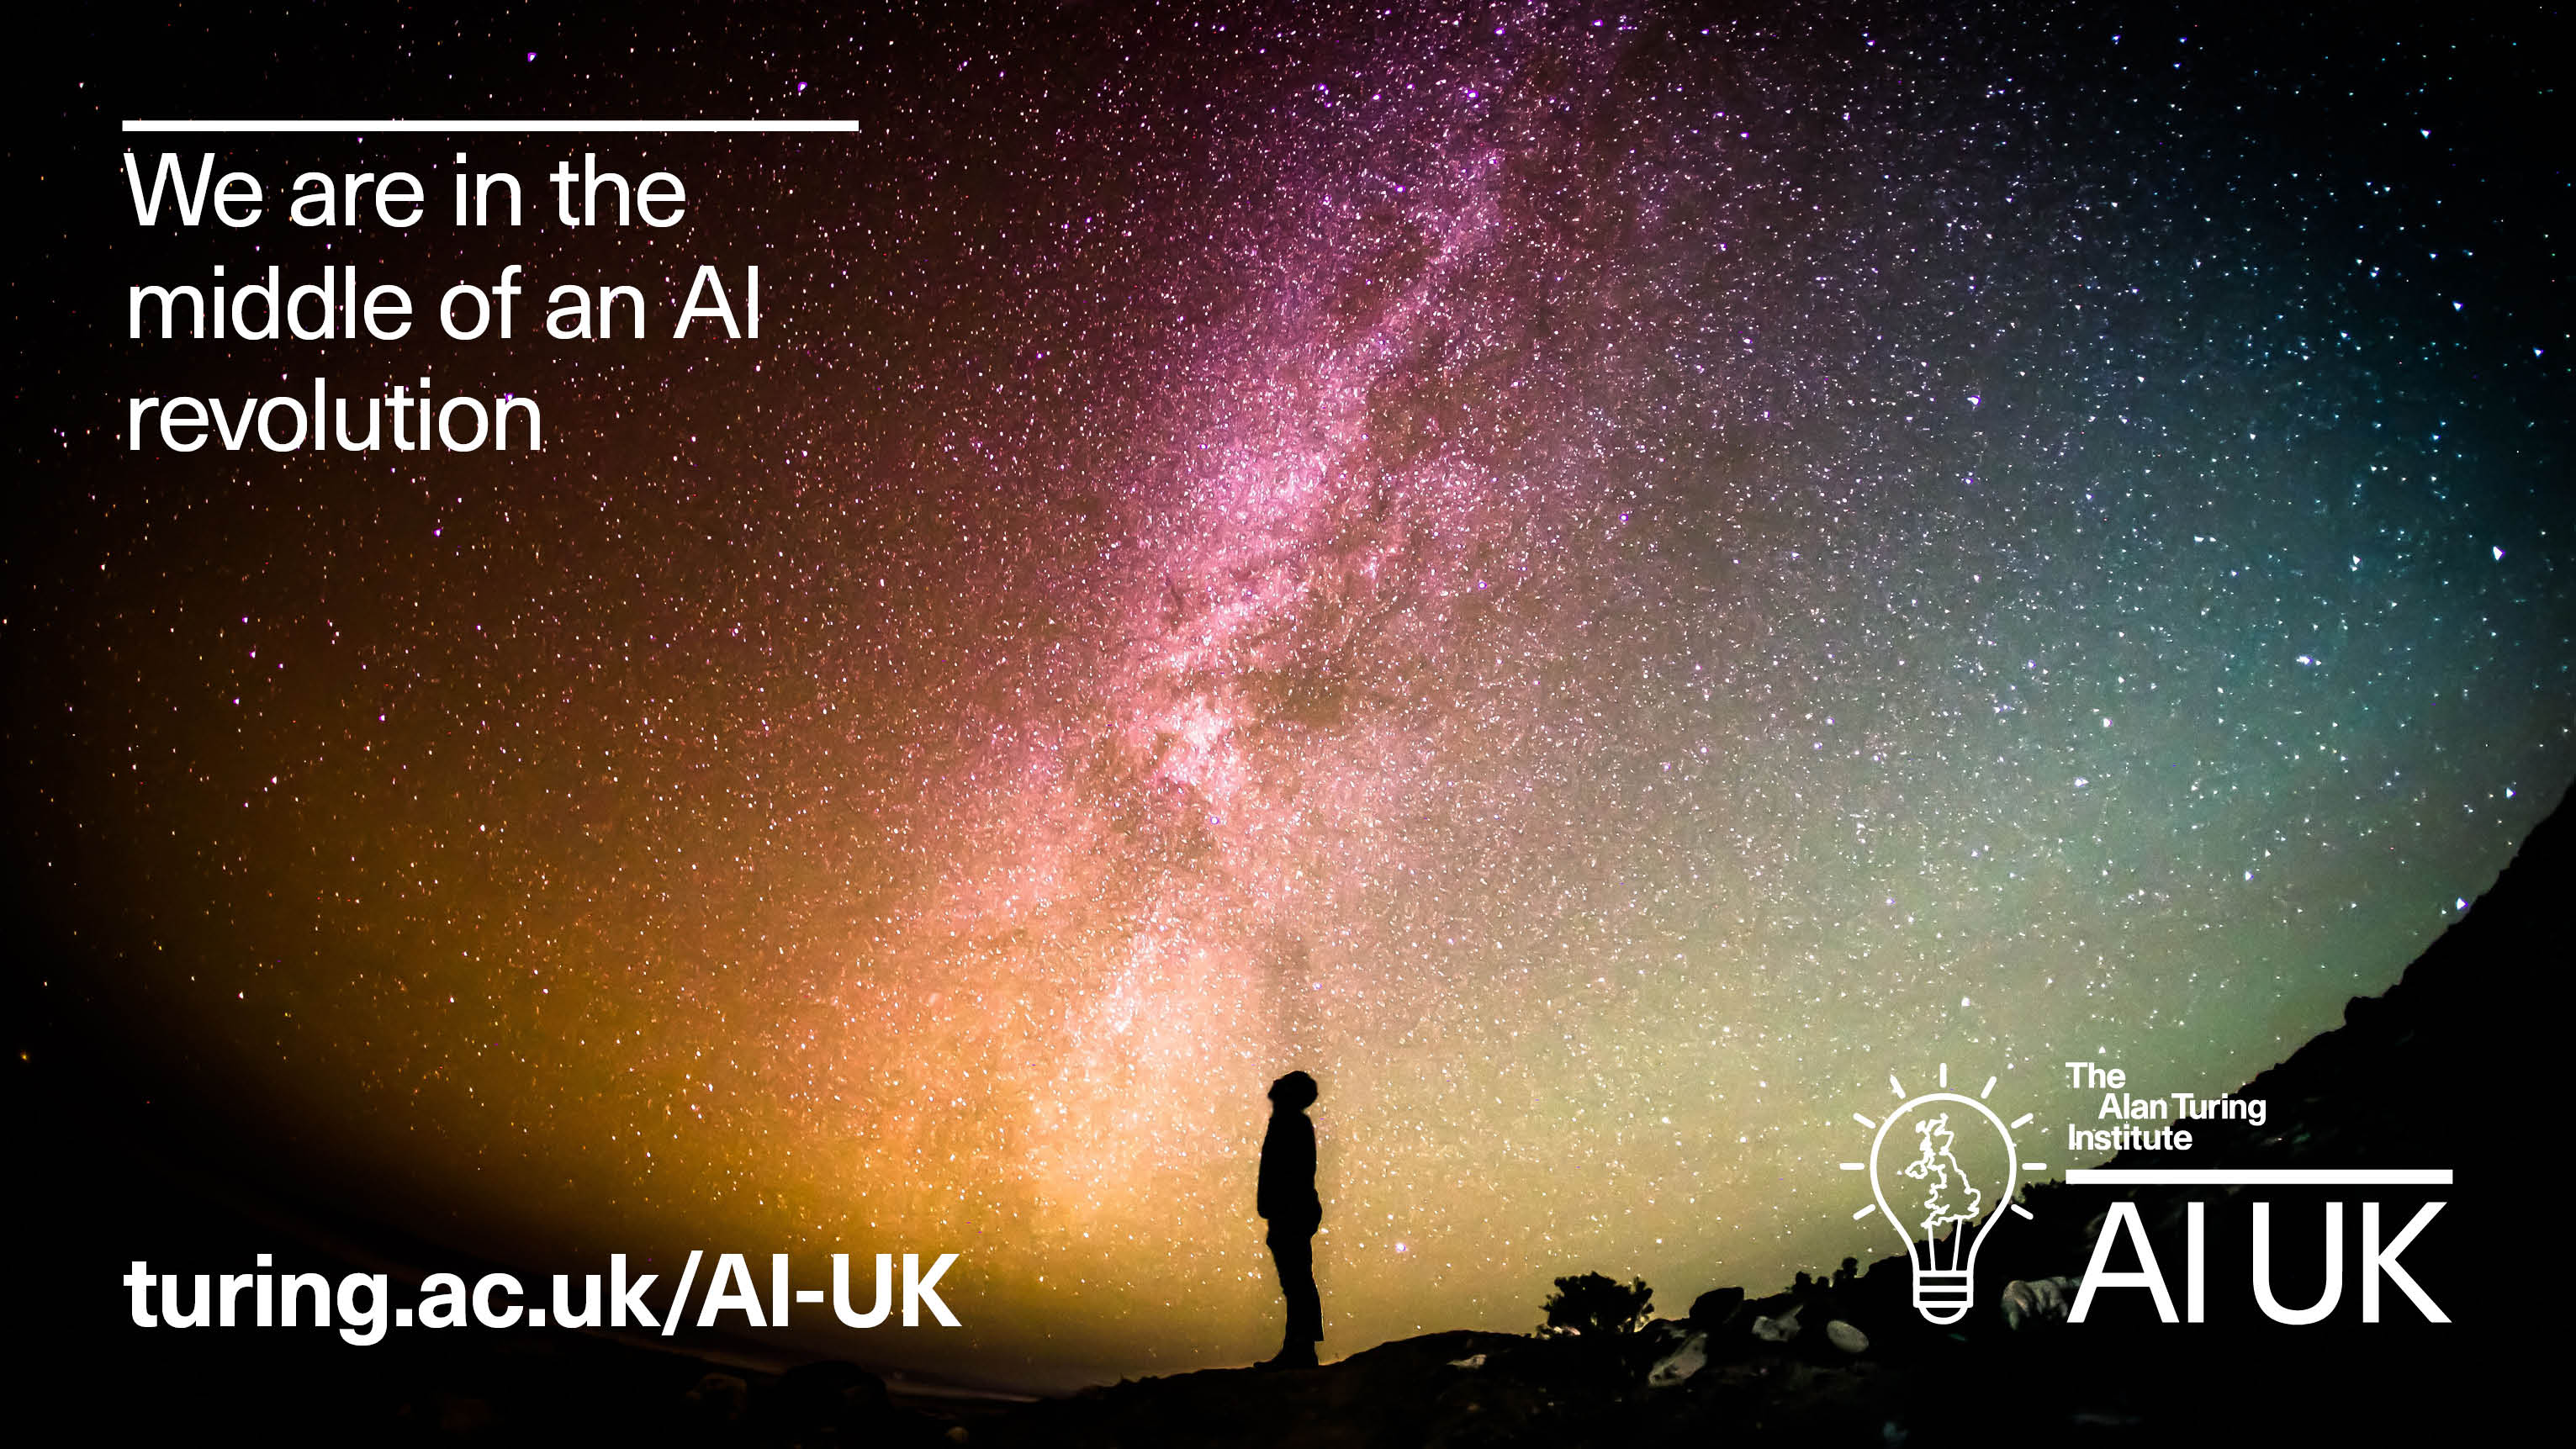 AI UK promo photo of man standing in field underneath stars with caption 'We are in the middle of an AI revolution'